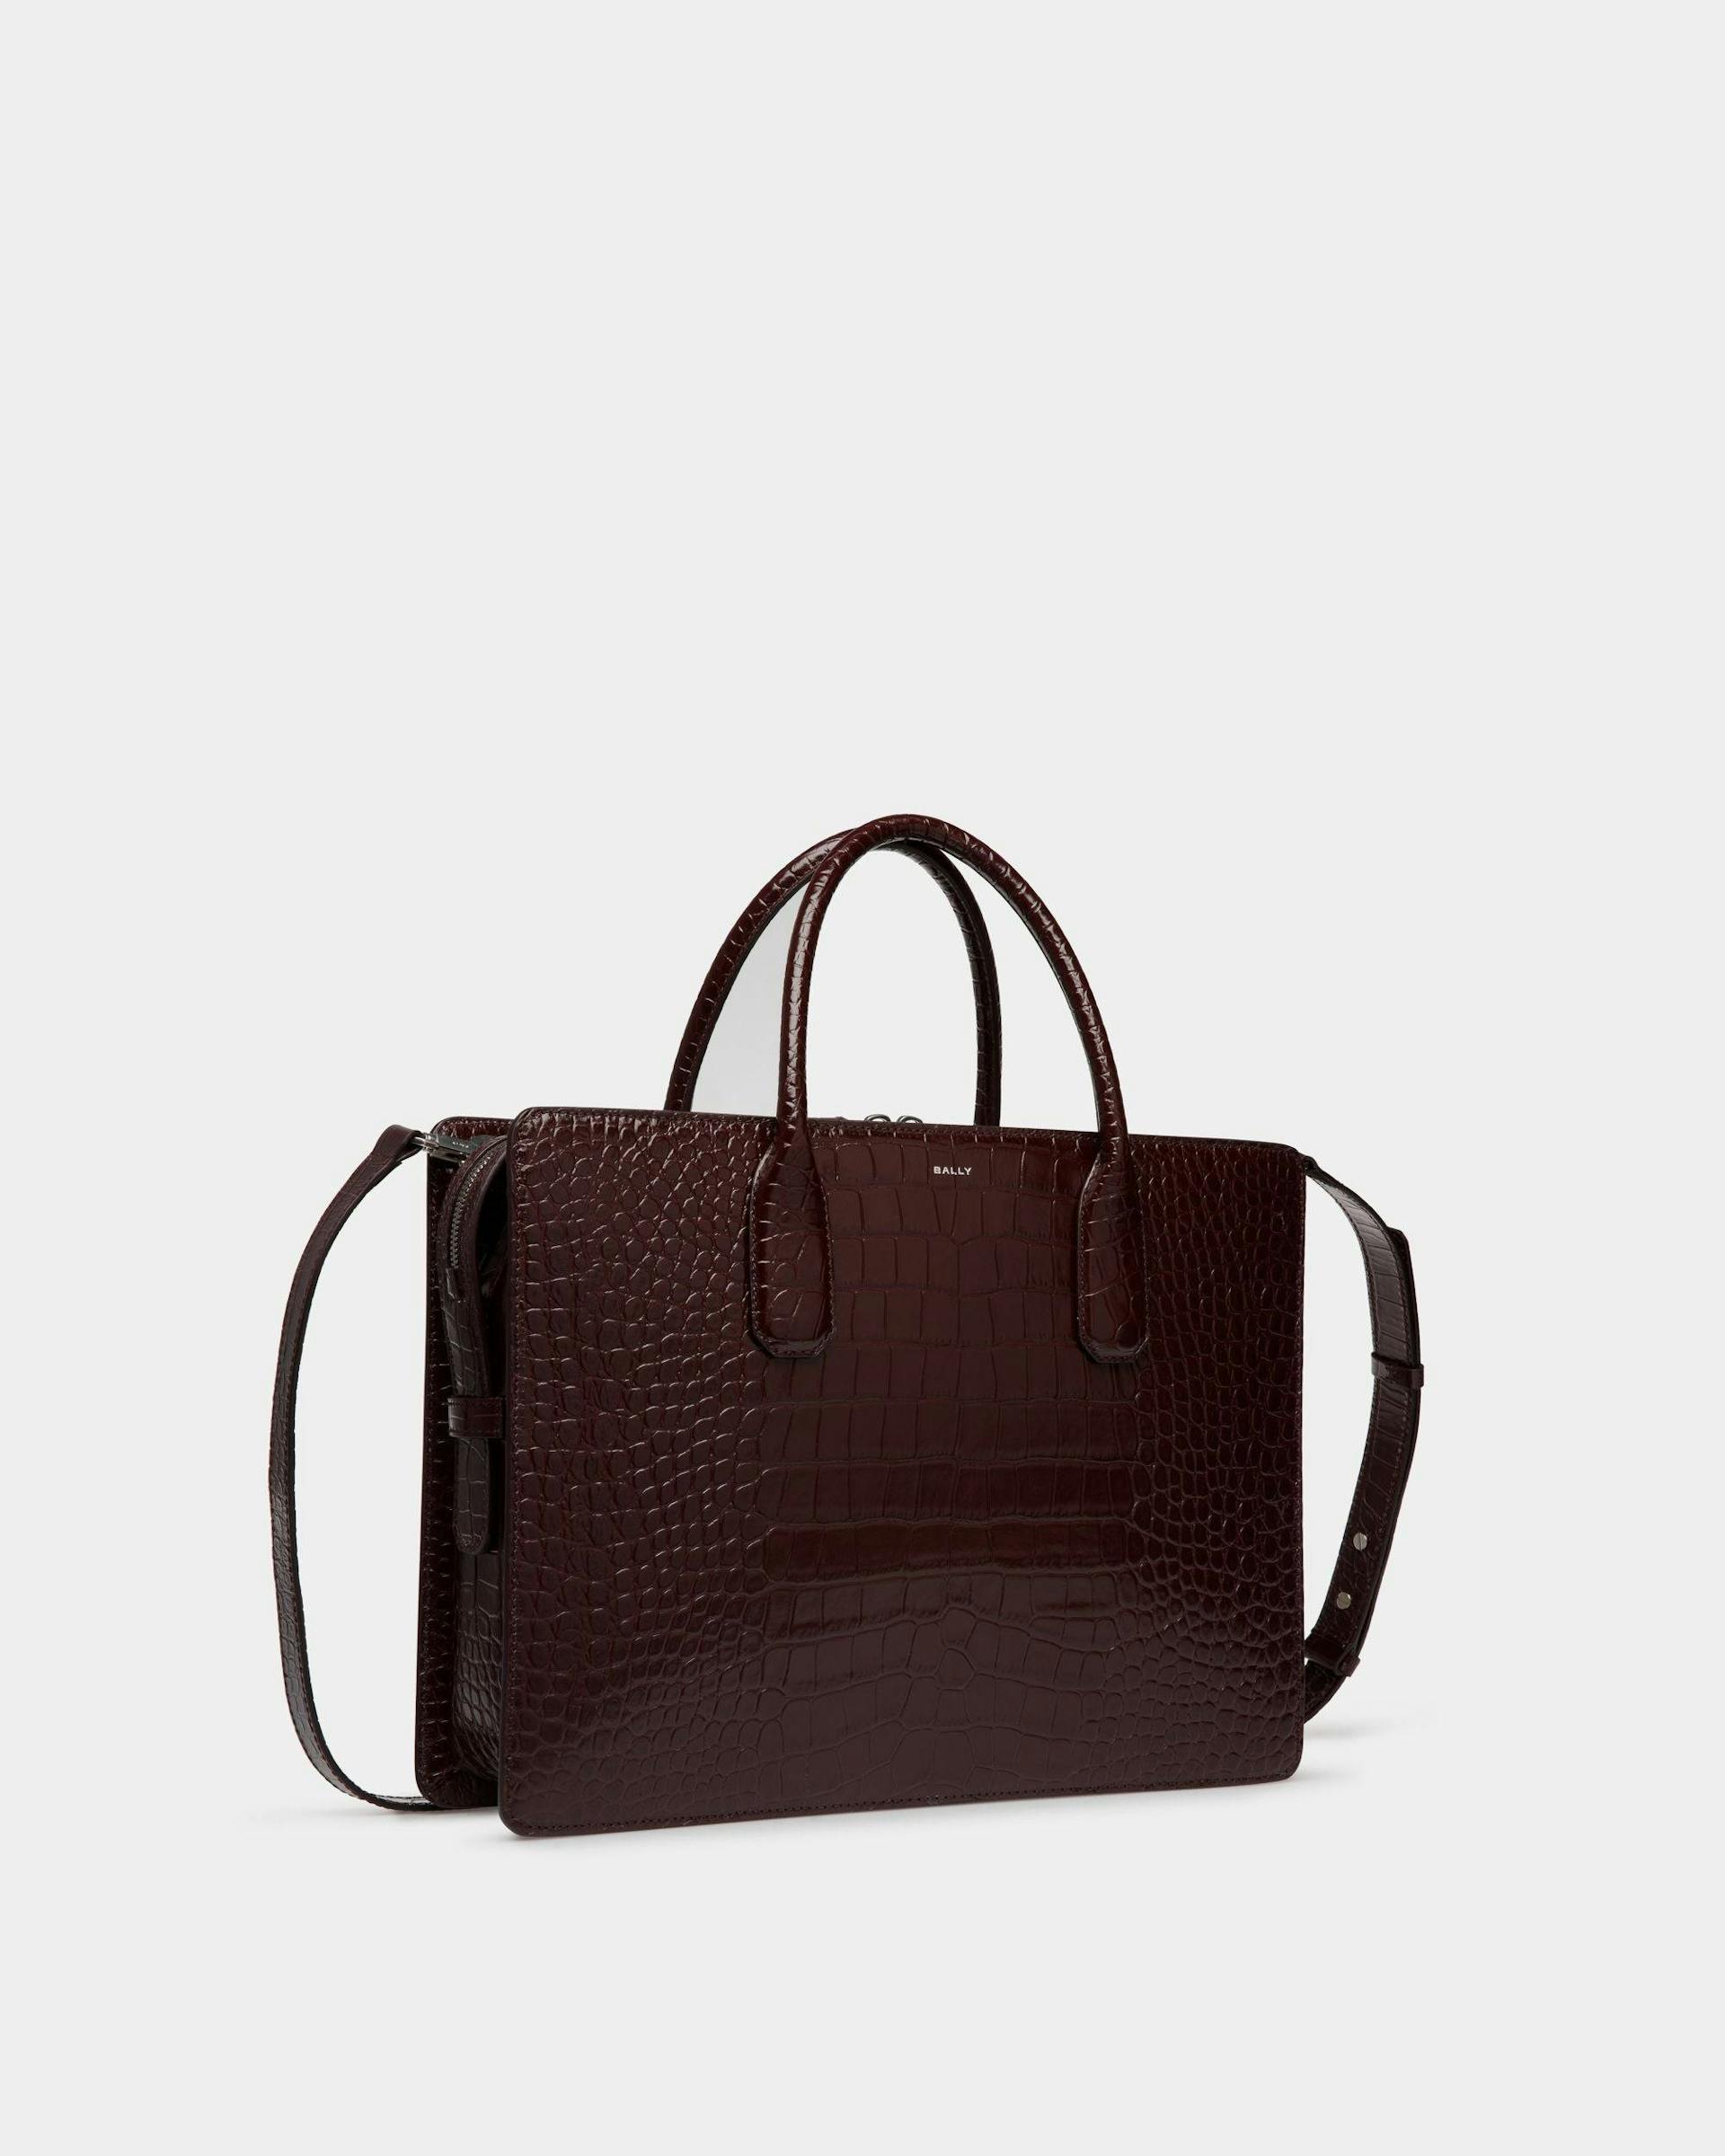 Men's Banque Business Bag In Chablis Leather | Bally | Still Life 3/4 Front